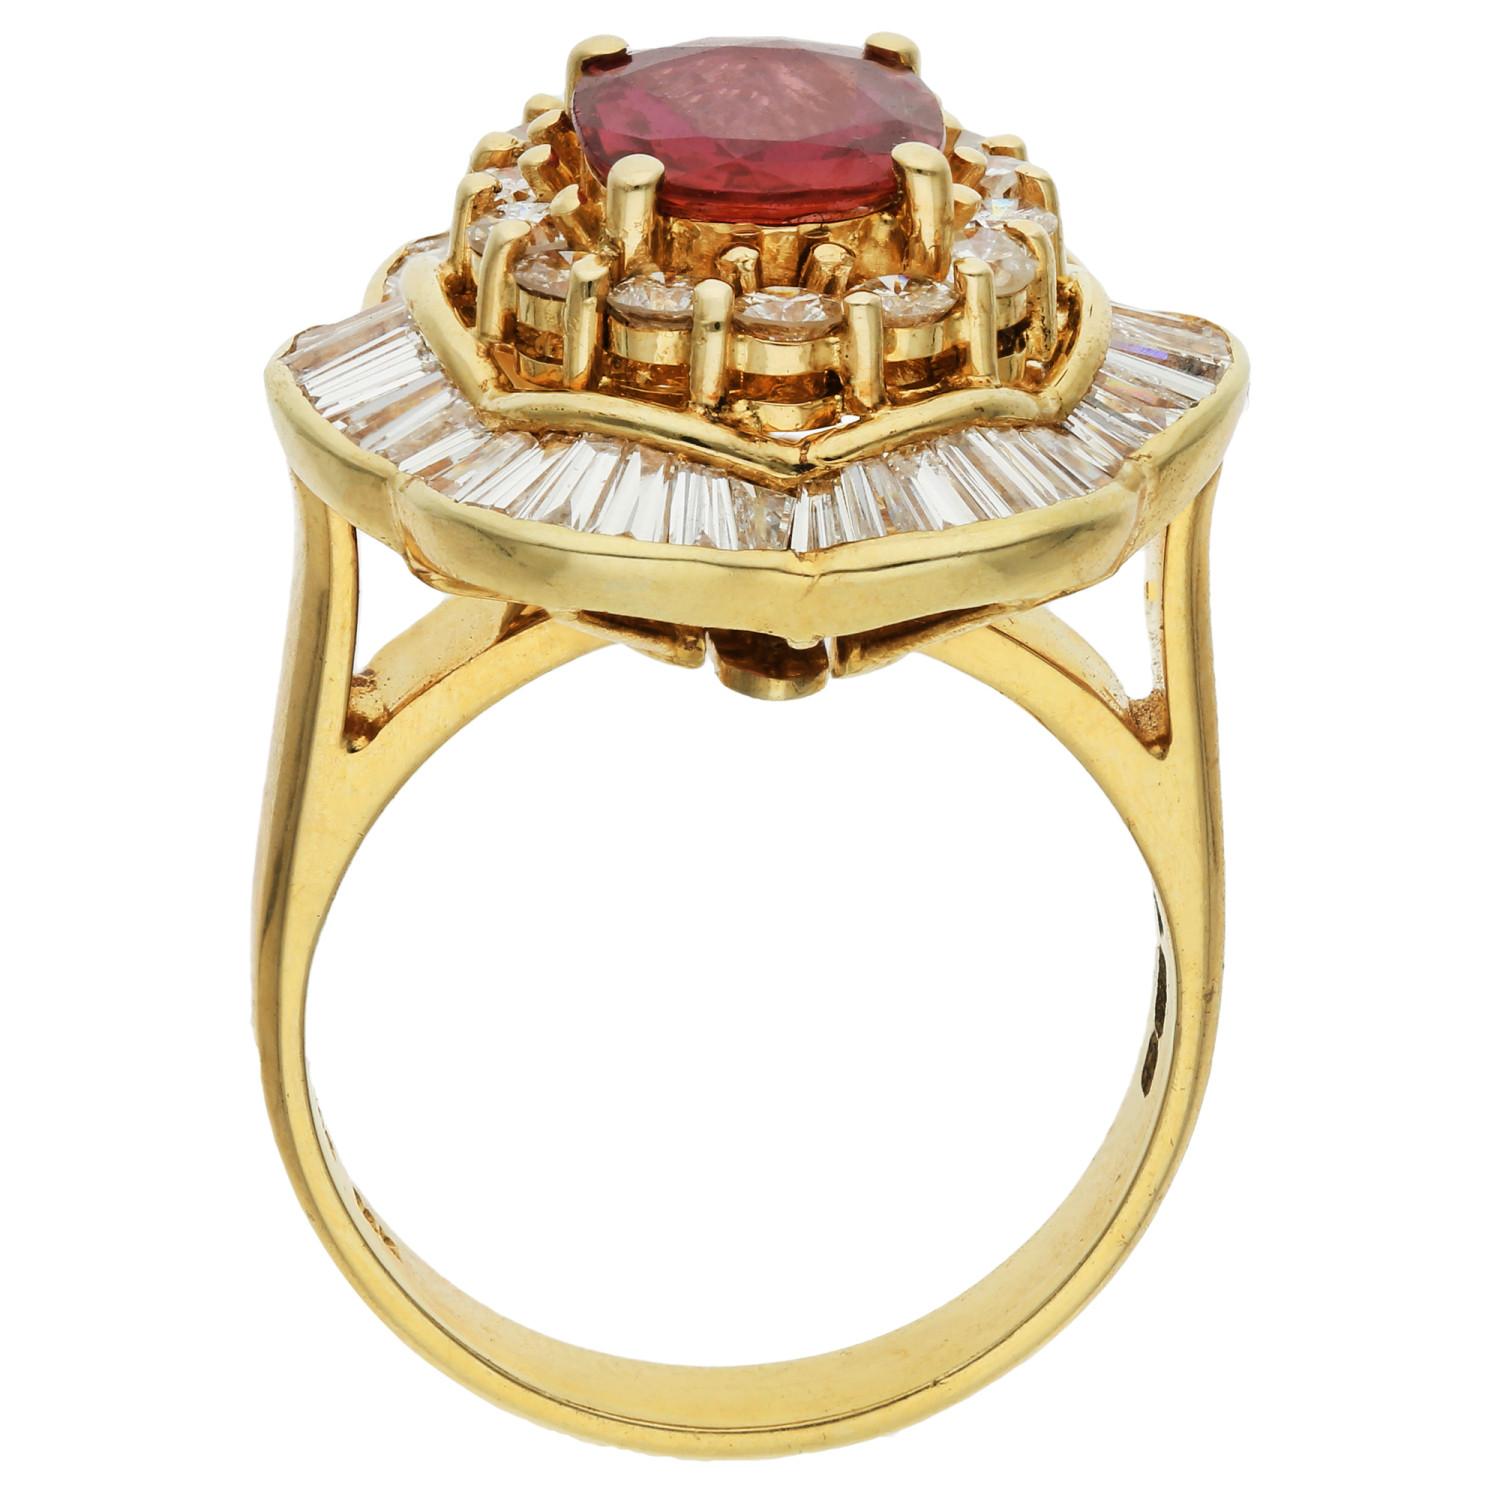 Introducing our captivating Pre-Loved 14ct Yellow Gold Ruby & Diamond Dress Ring, a versatile masterpiece that seamlessly transforms into a pendant. At its heart lies a mesmerising oval cut ruby, encased in a sparkling frame of brilliant cut